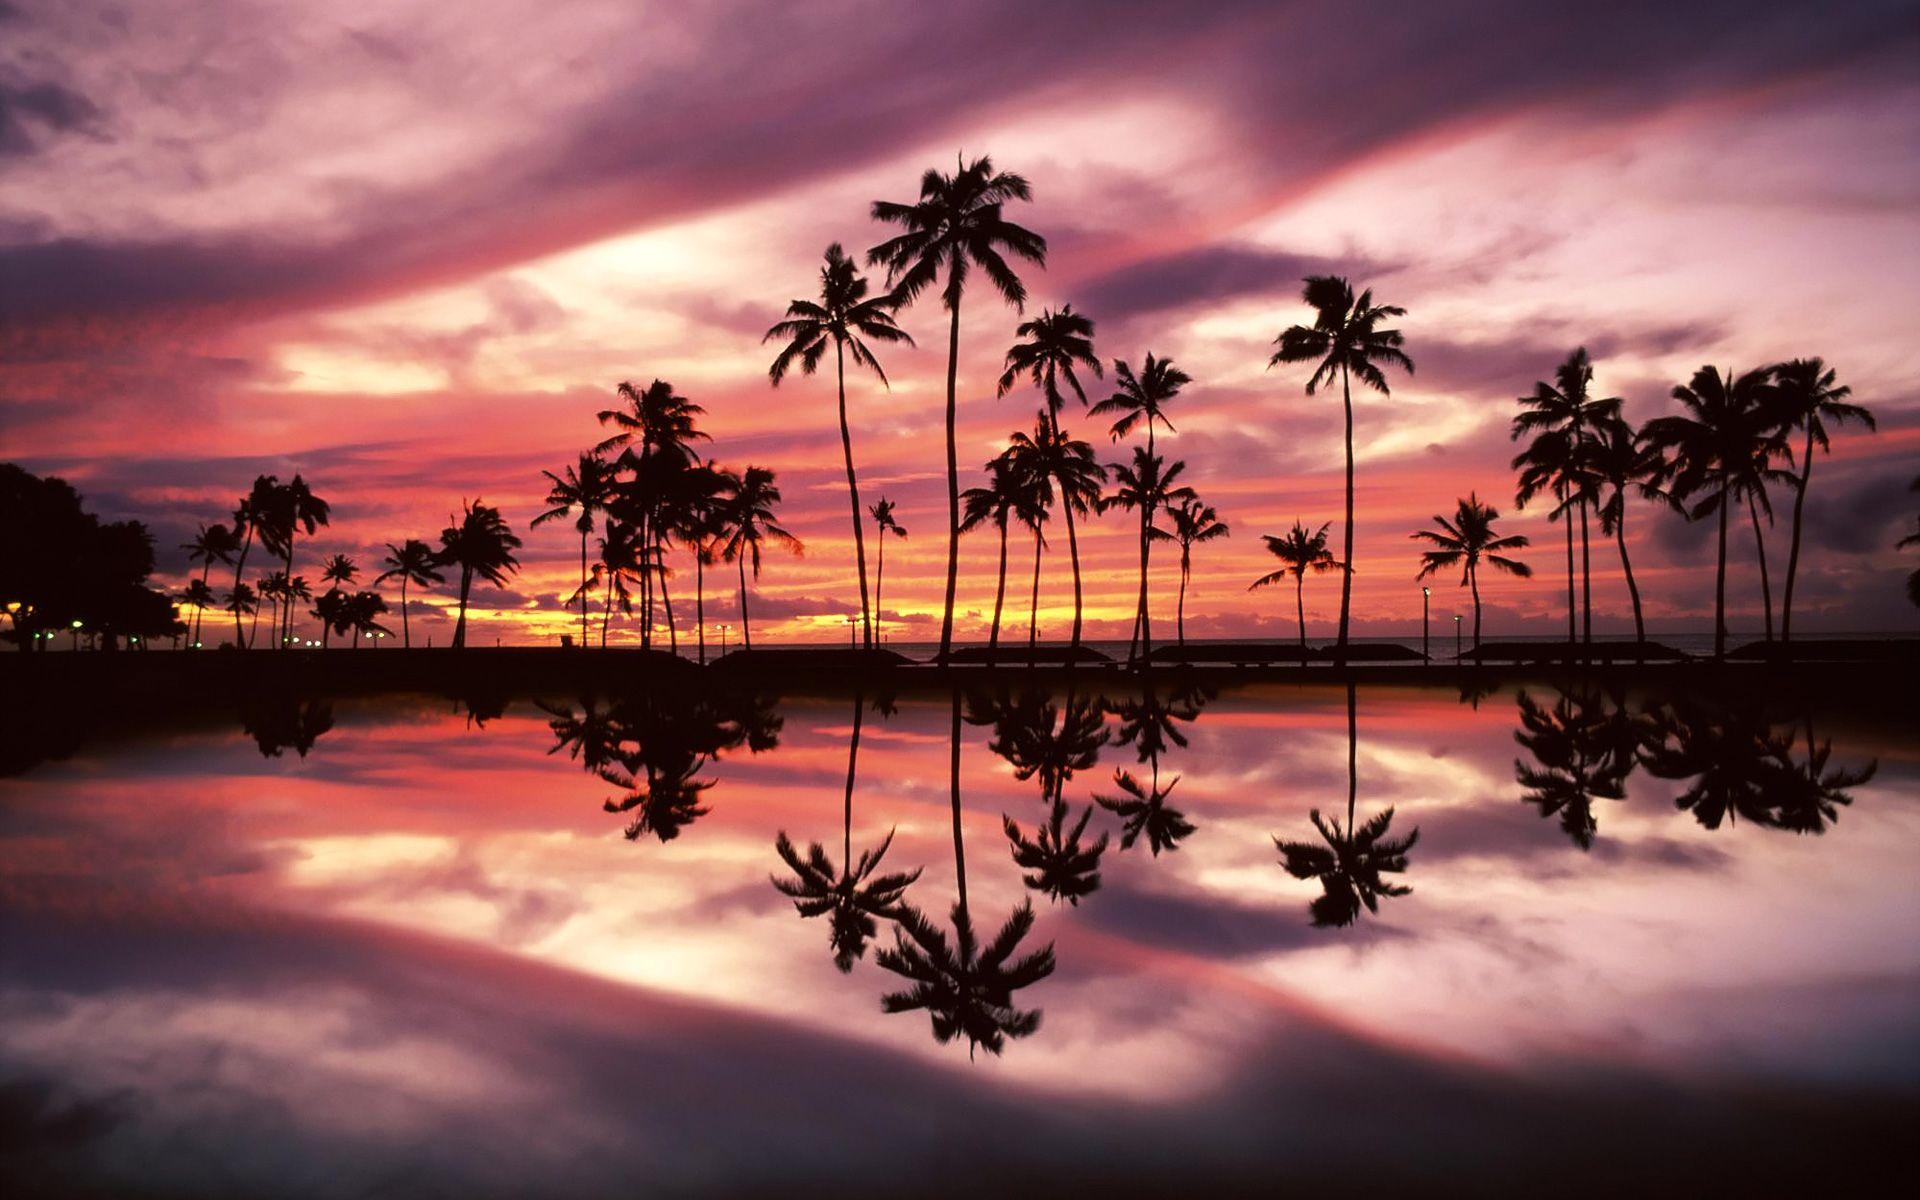 Ocean Sunset With Palm Trees HD Wallpaper, Background Image